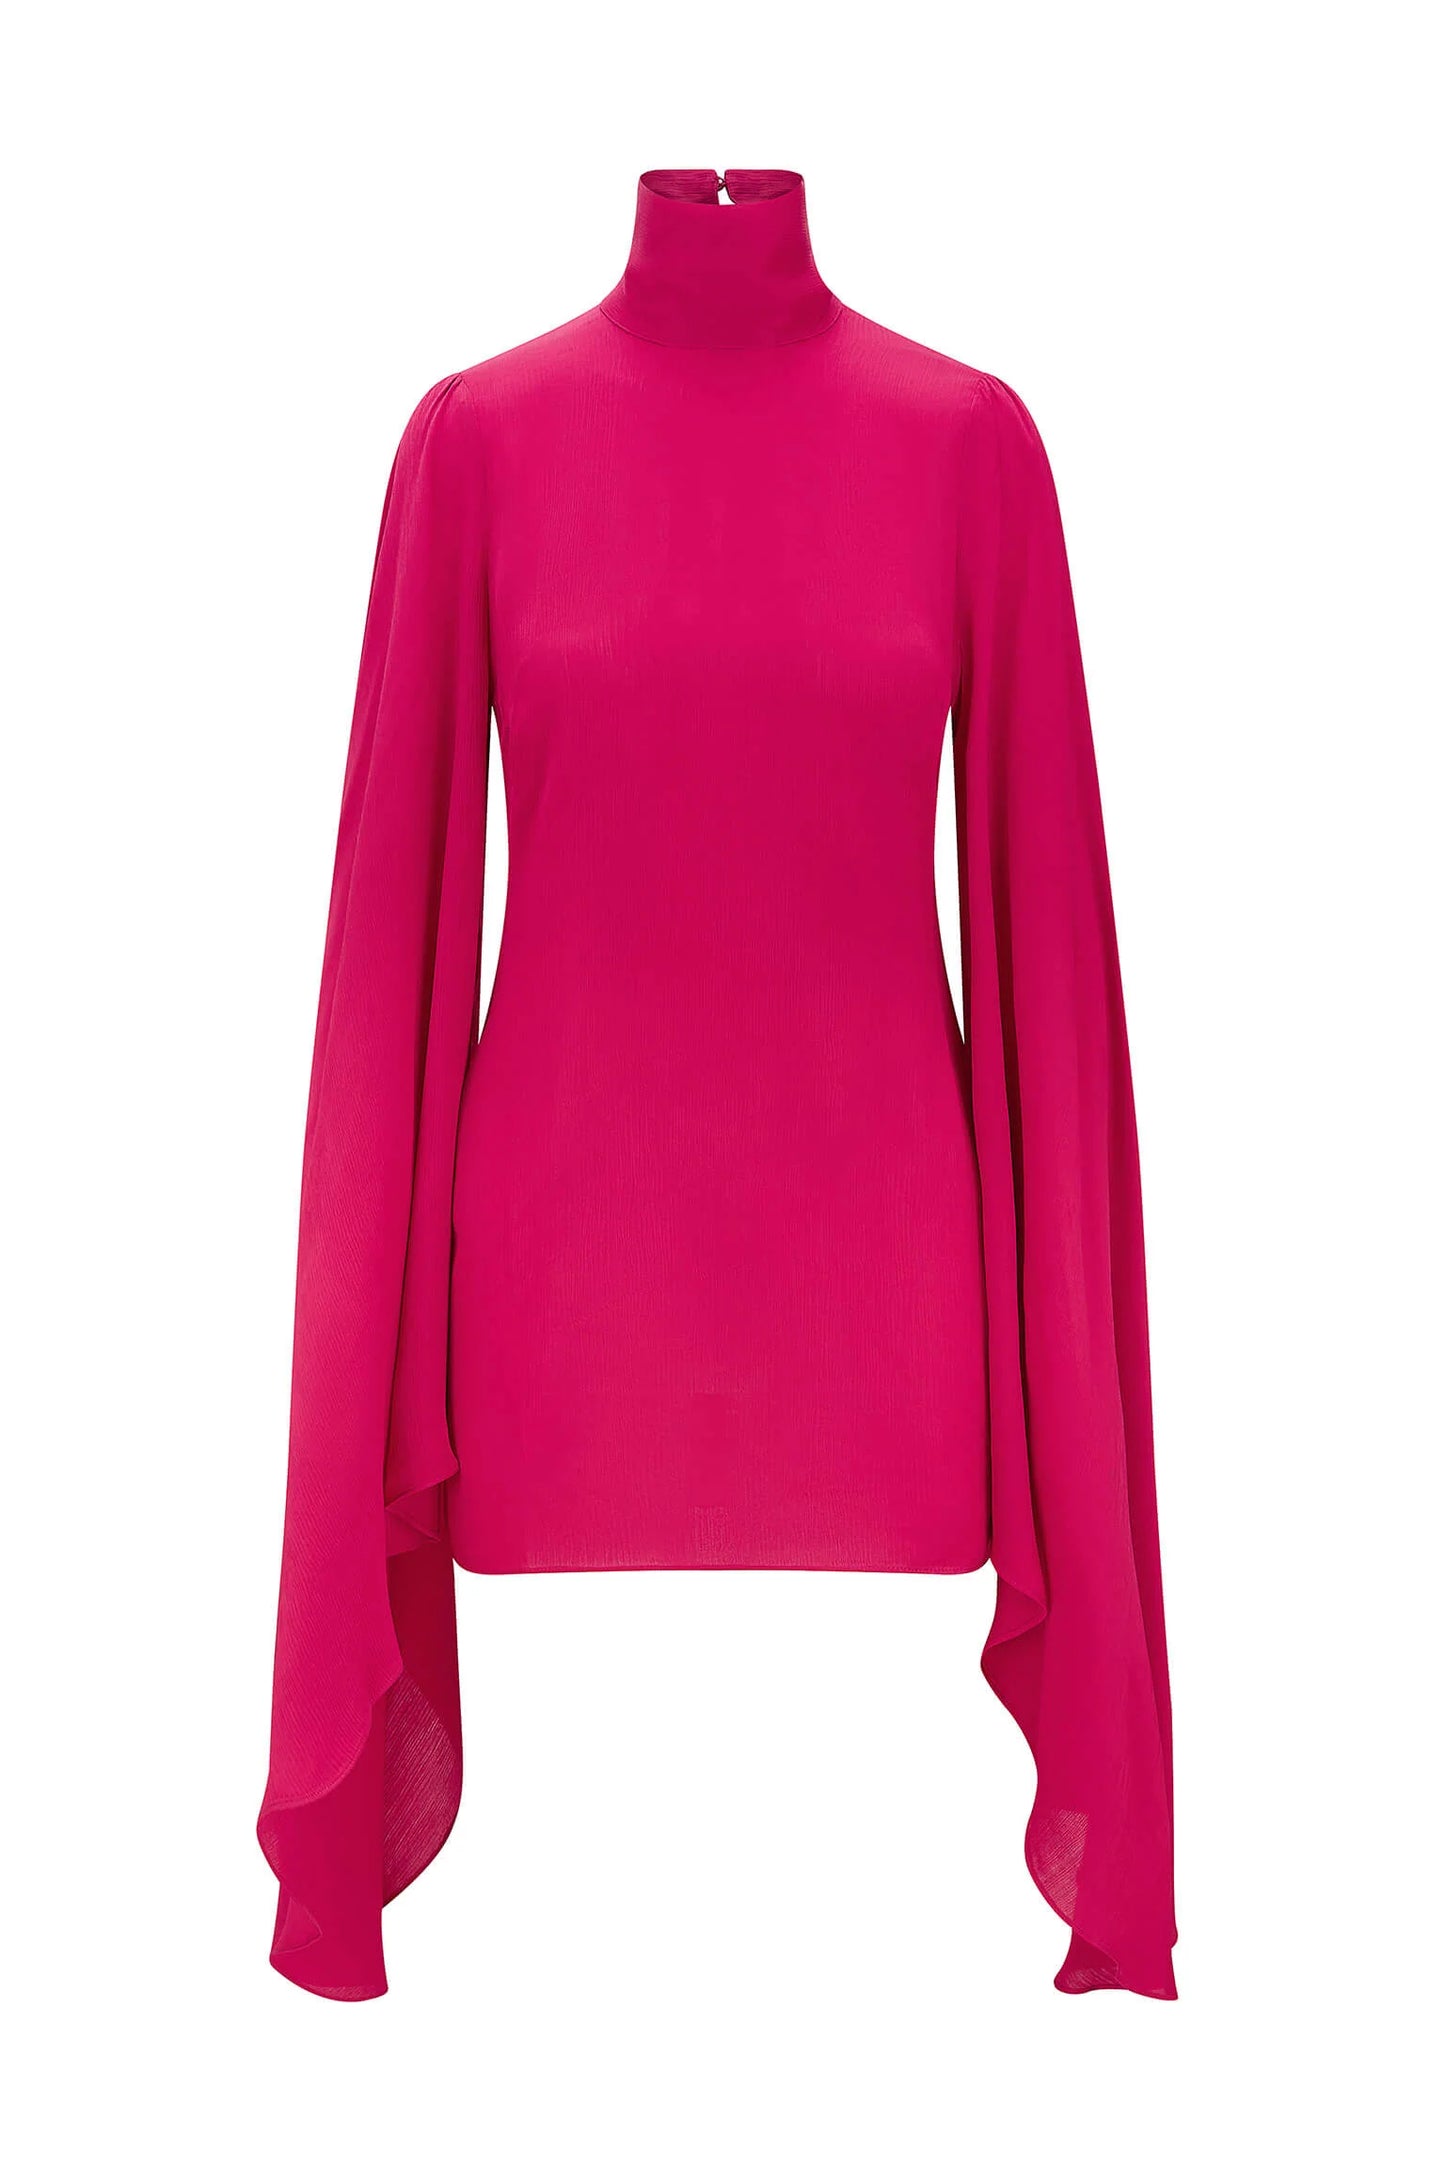 A fuchsia top with a long sleeve and frills.